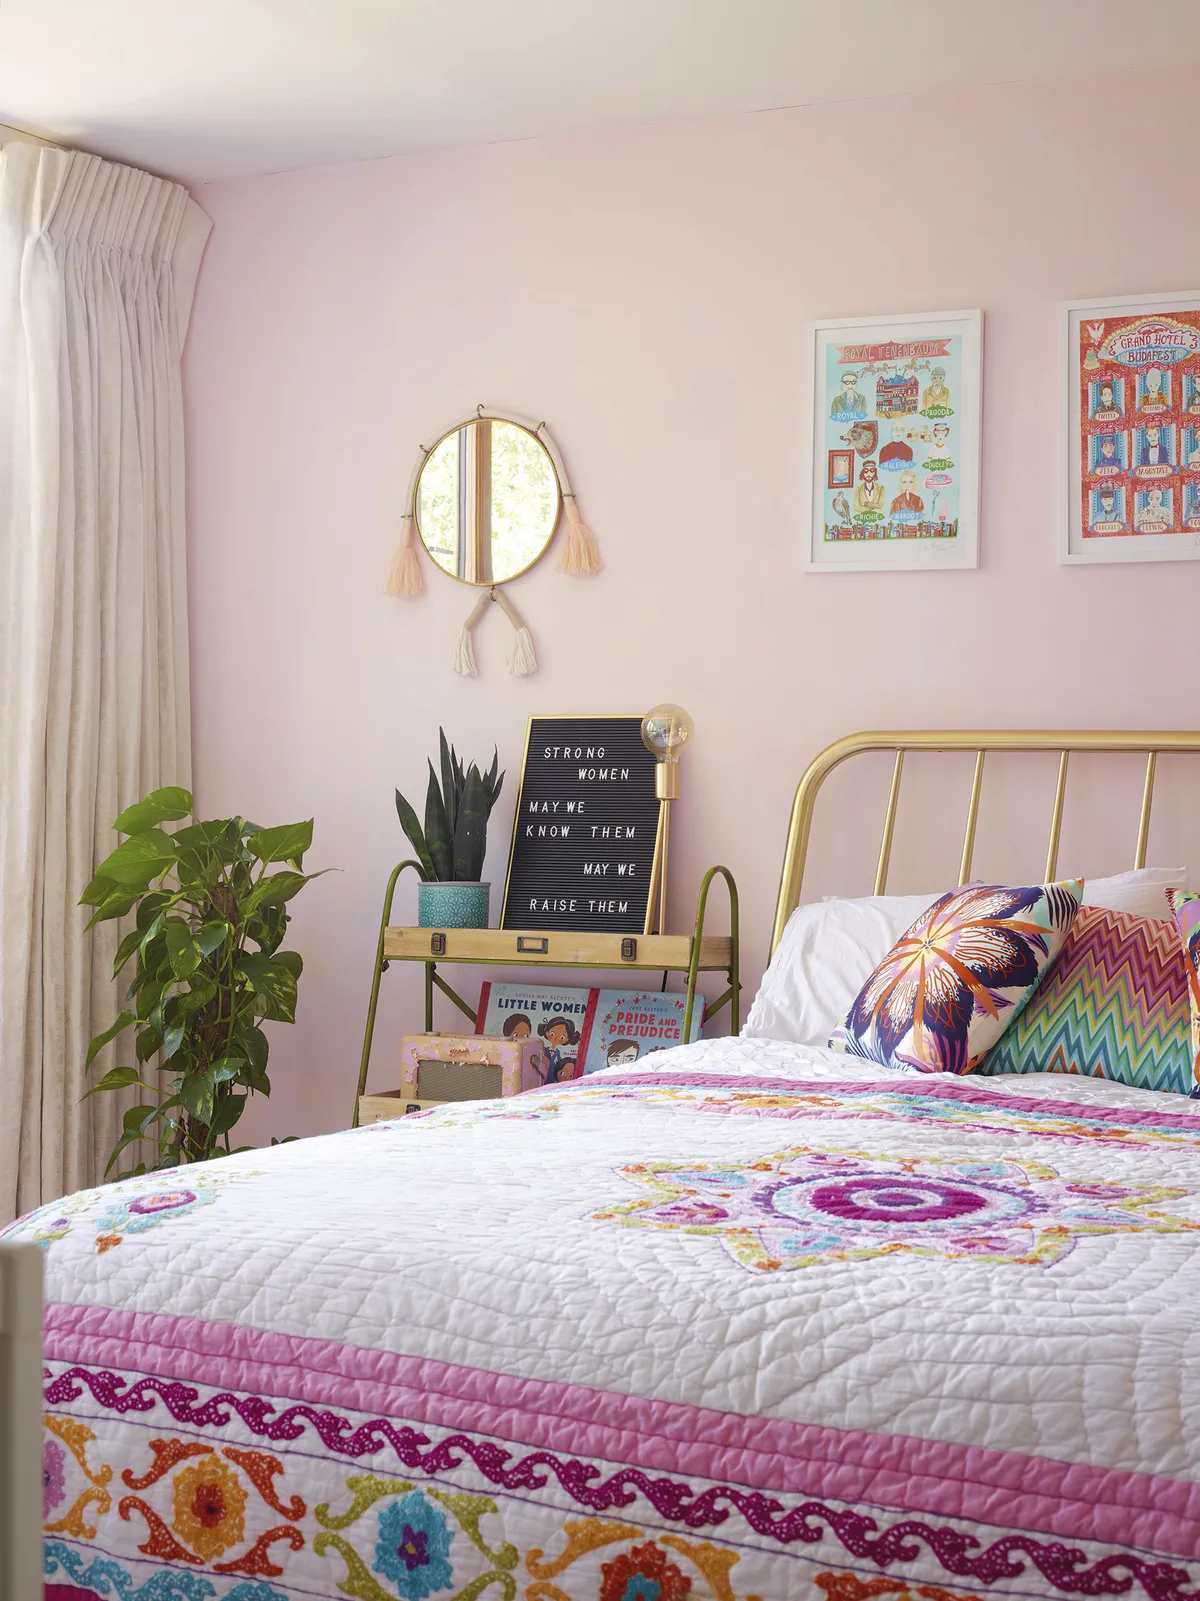 ‘We let Lexi pick her own design in here,’ says Sam. ‘She chose the wall colour and many of the objects on display – I think she’s already a natural at interior styling! We wanted her to feel excited and inspired by her bedroom so it was important to have her involved with the design process’